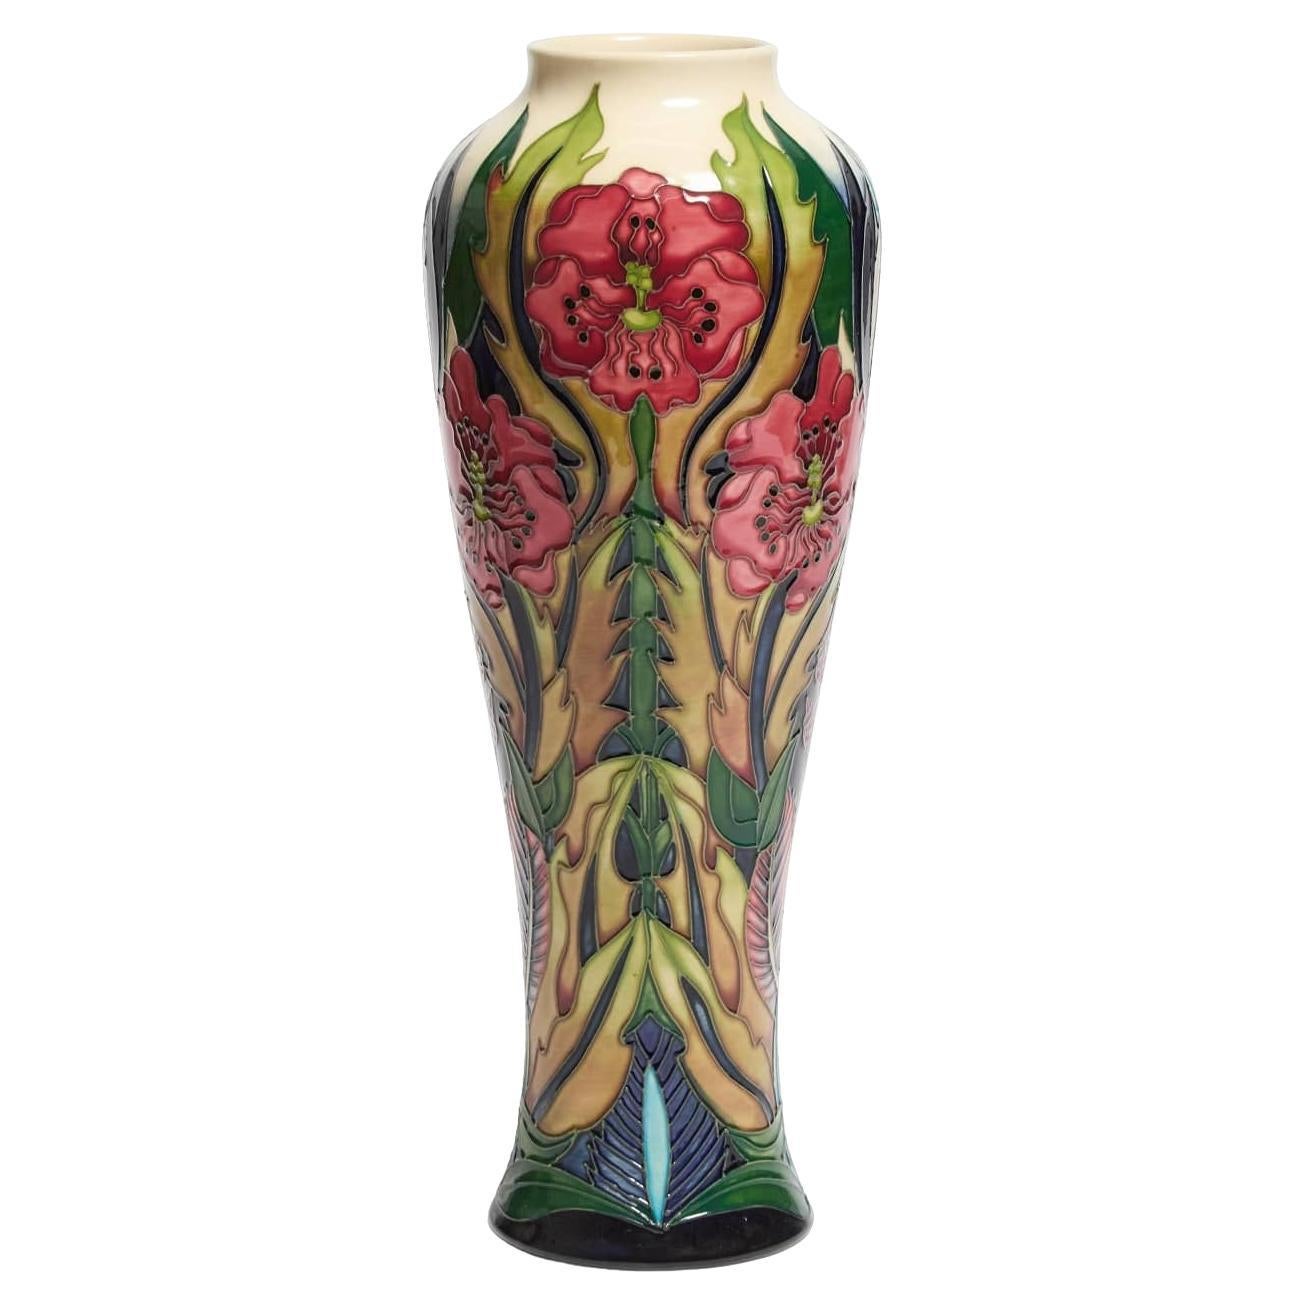 MOORCROFT POTTERY VASE "Evening Sunset" by Andrew Hull, 8/50, 2005 For Sale